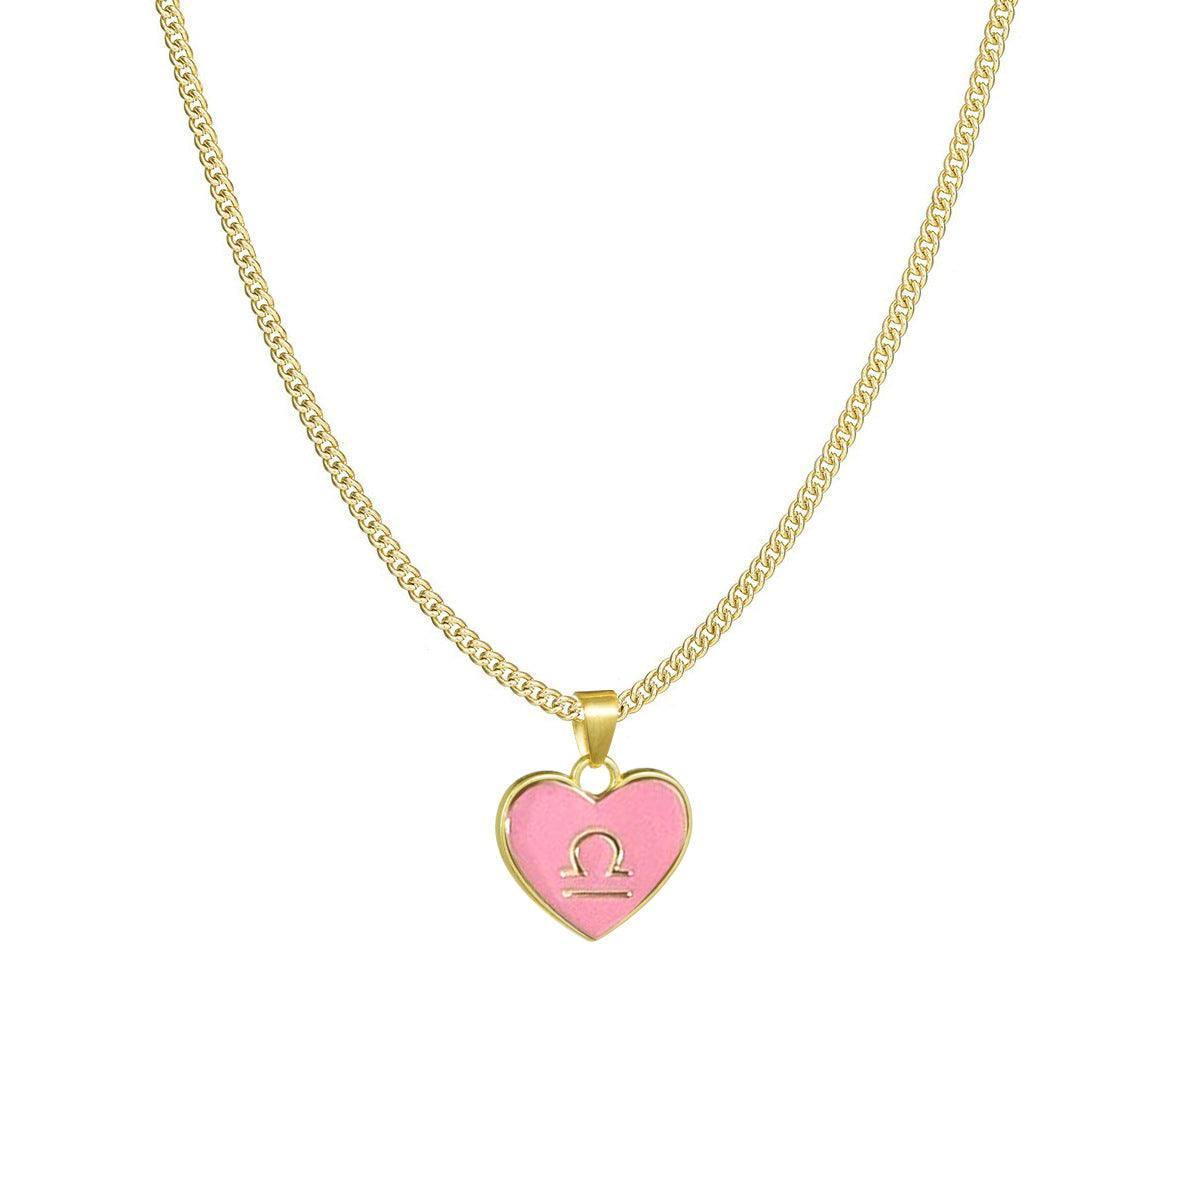 Trendy Zodiac Sign Necklaces for Stylish Astrology Fans-Libra-5